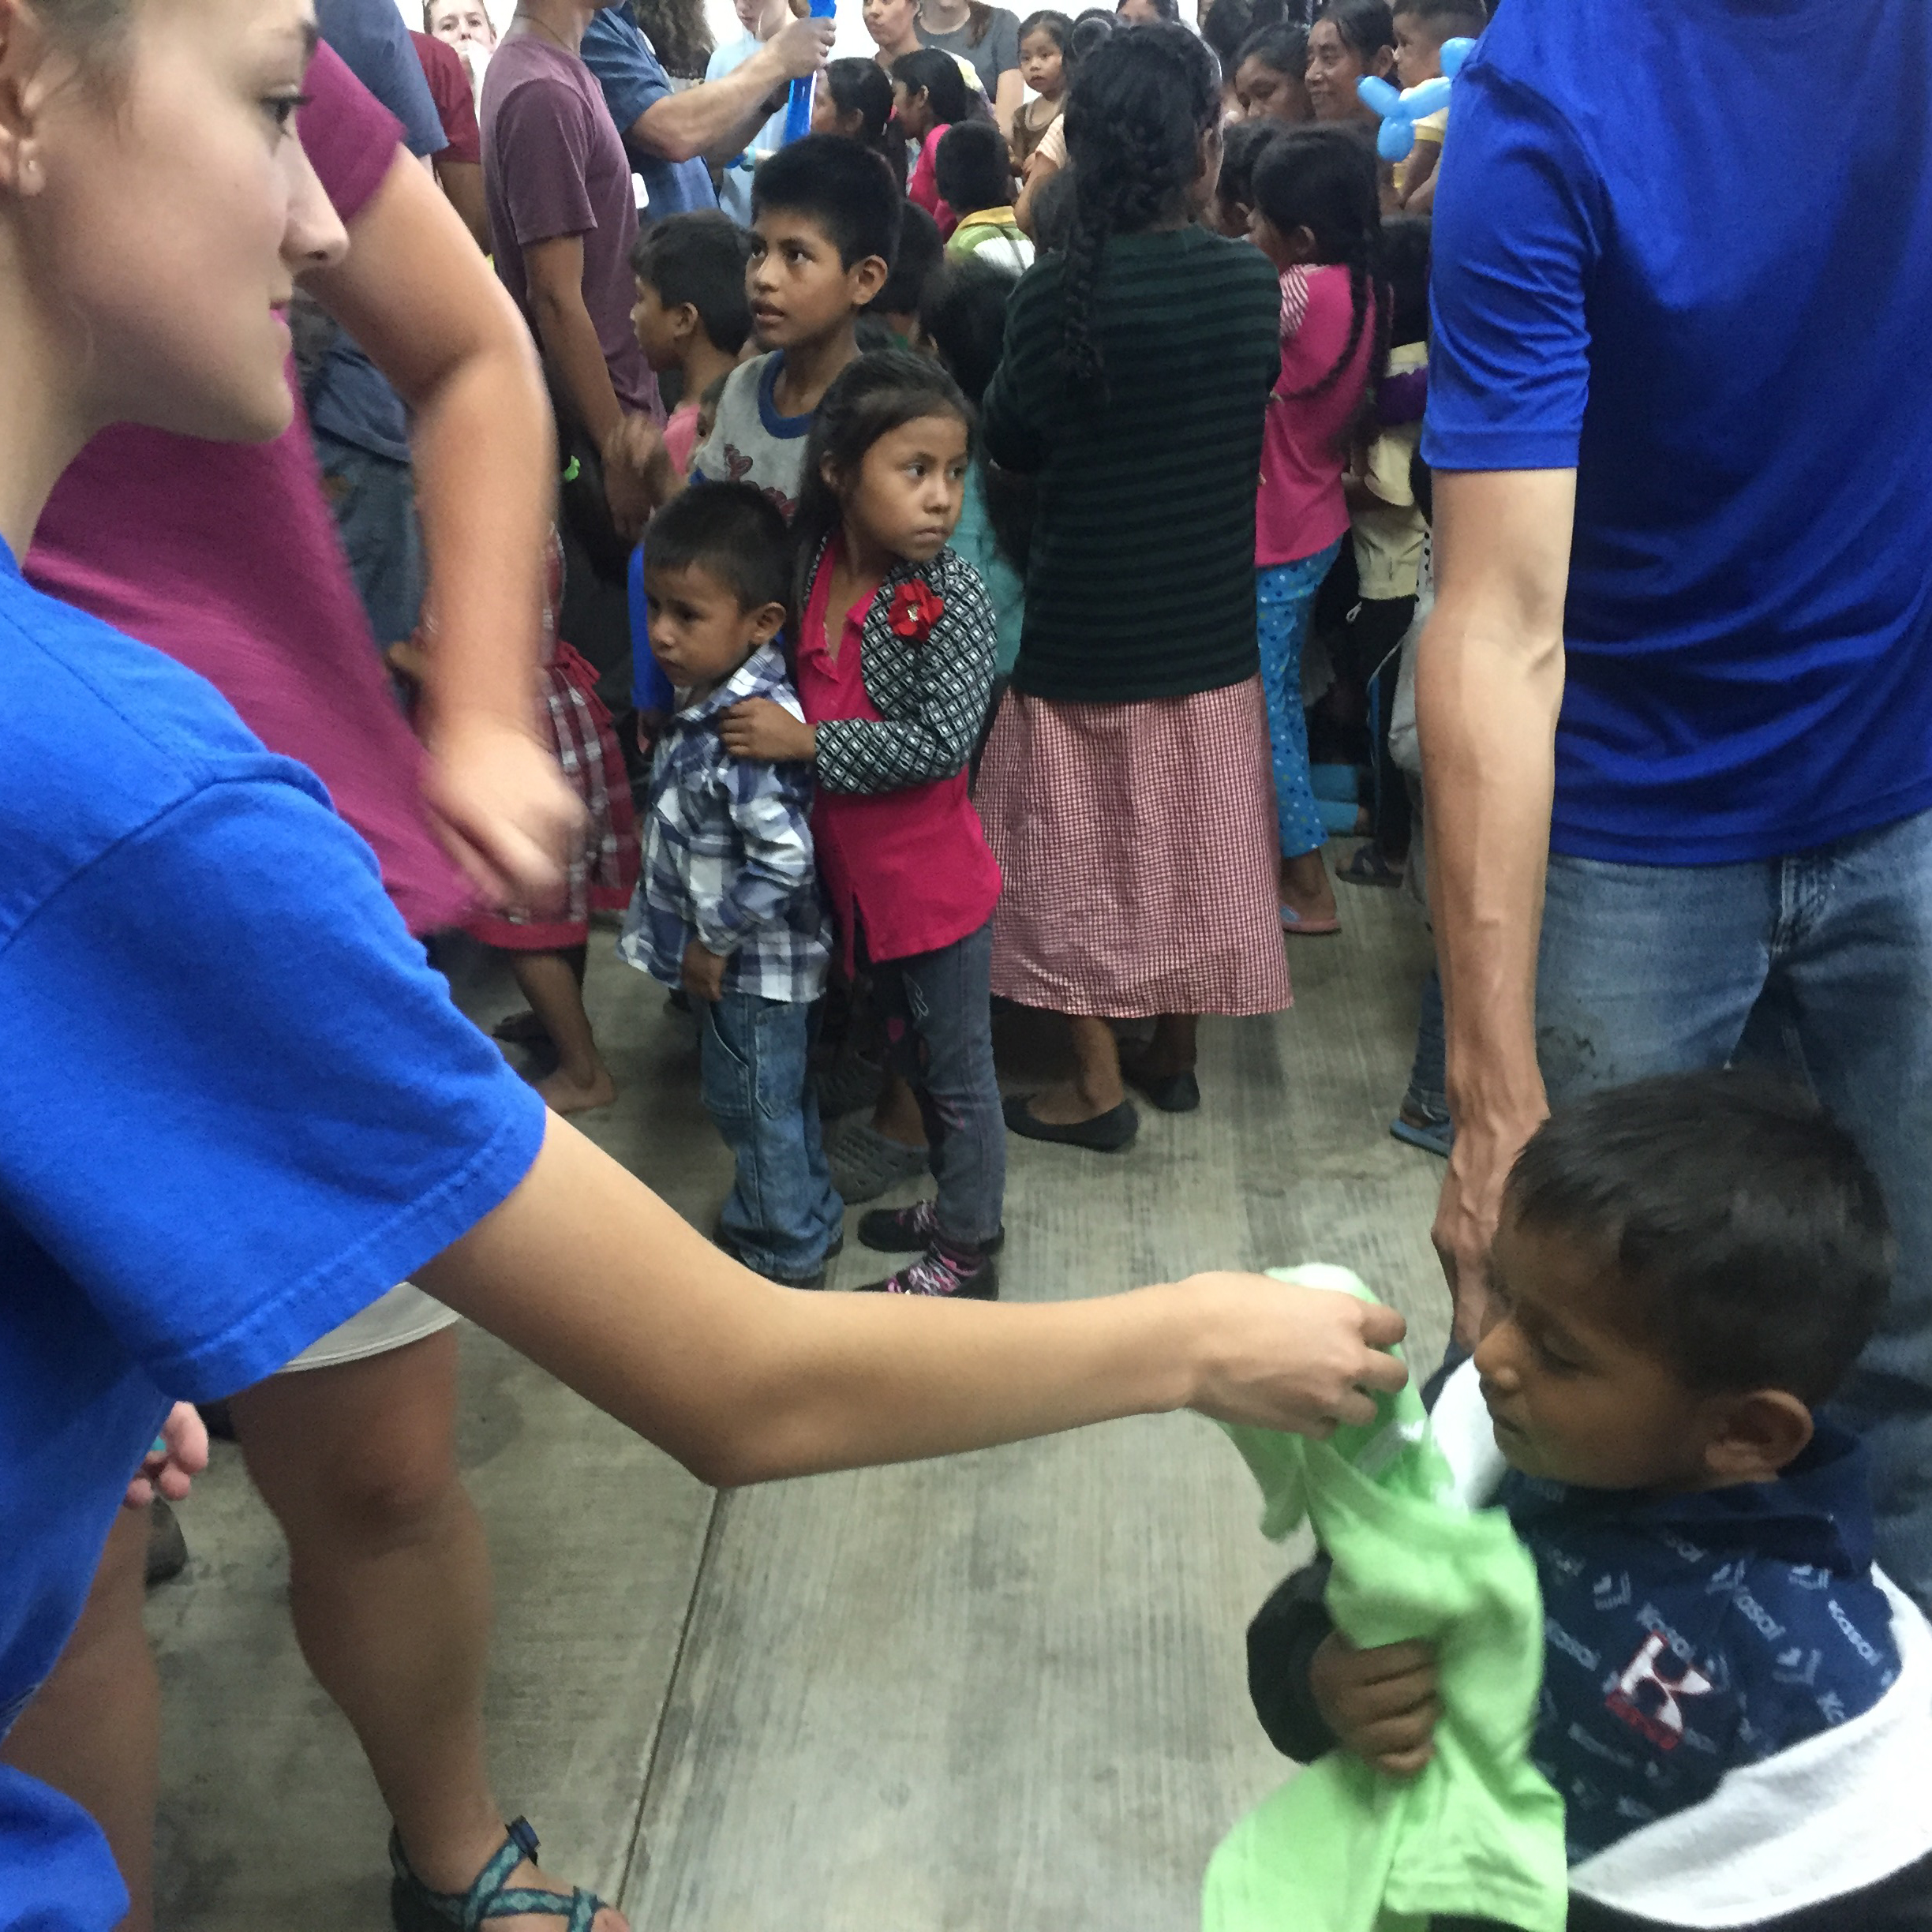 20180724 Students Mission Trip Mexico 003 crop.jpg